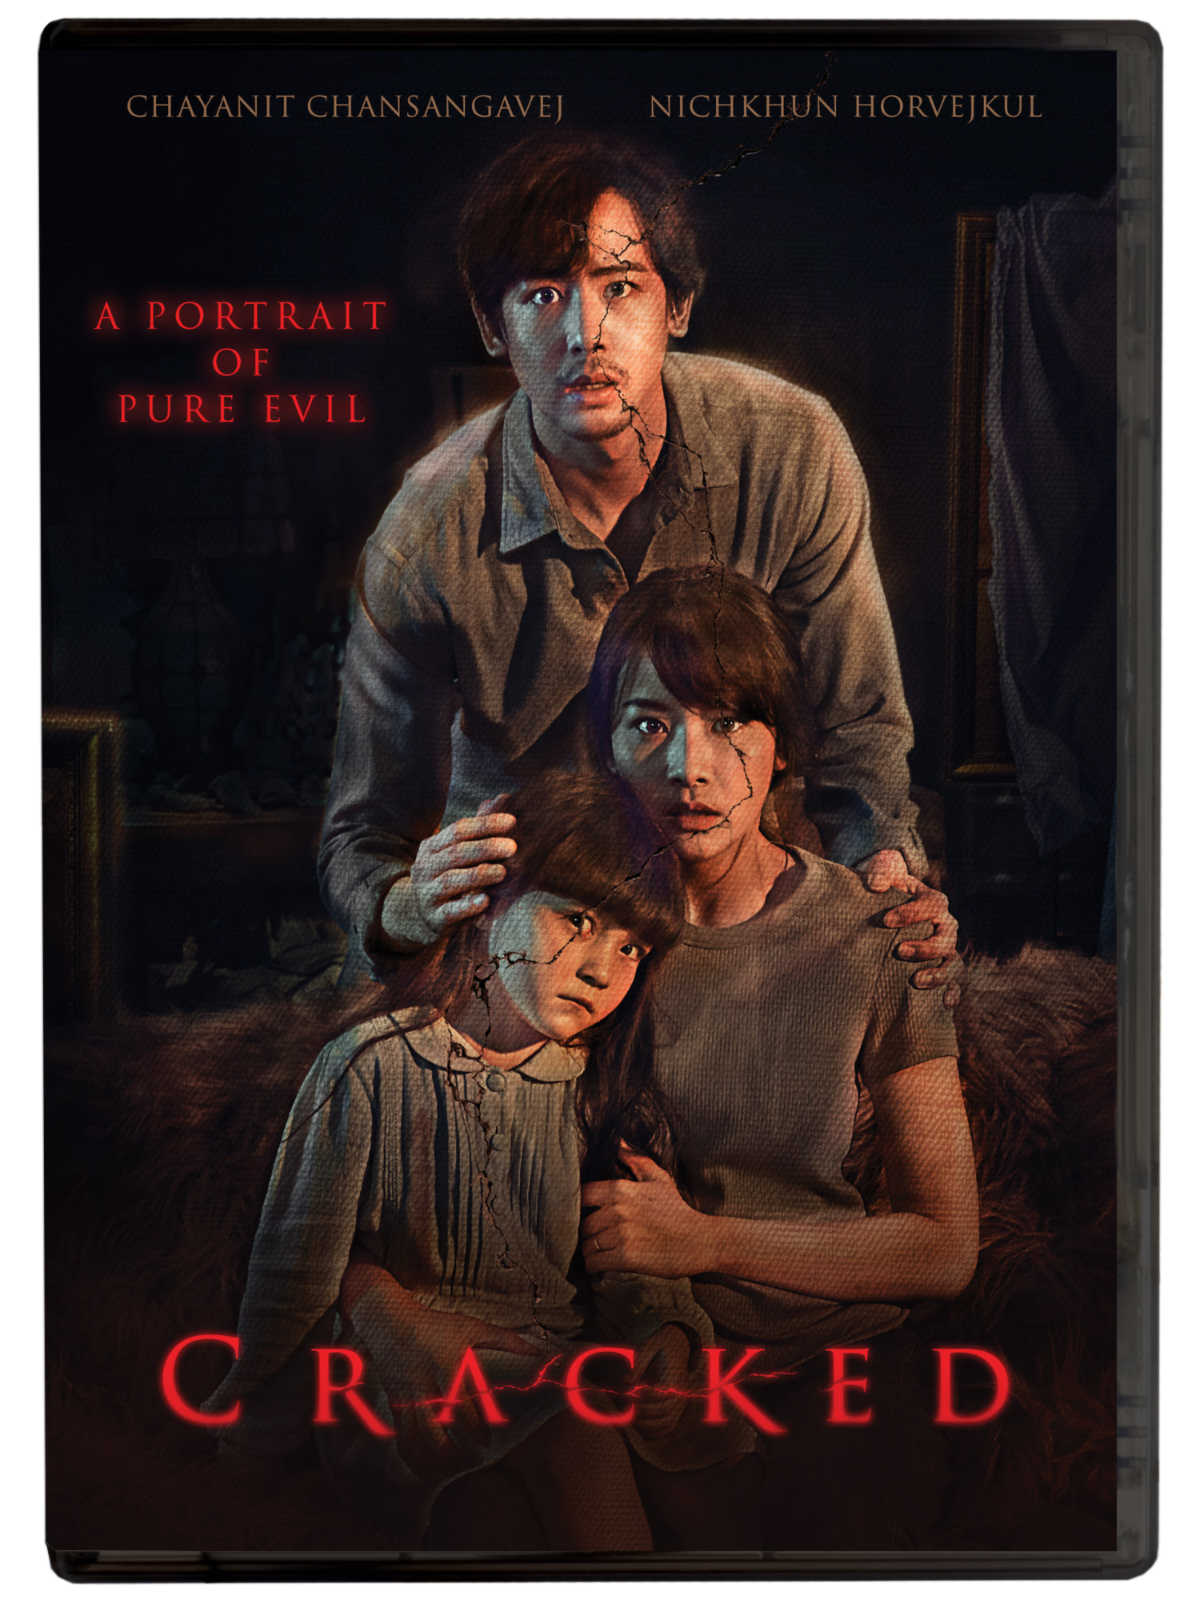 Cracked is a cursed Thai horror film that will keep you up at night with its suspenseful and chilling tale of terror.